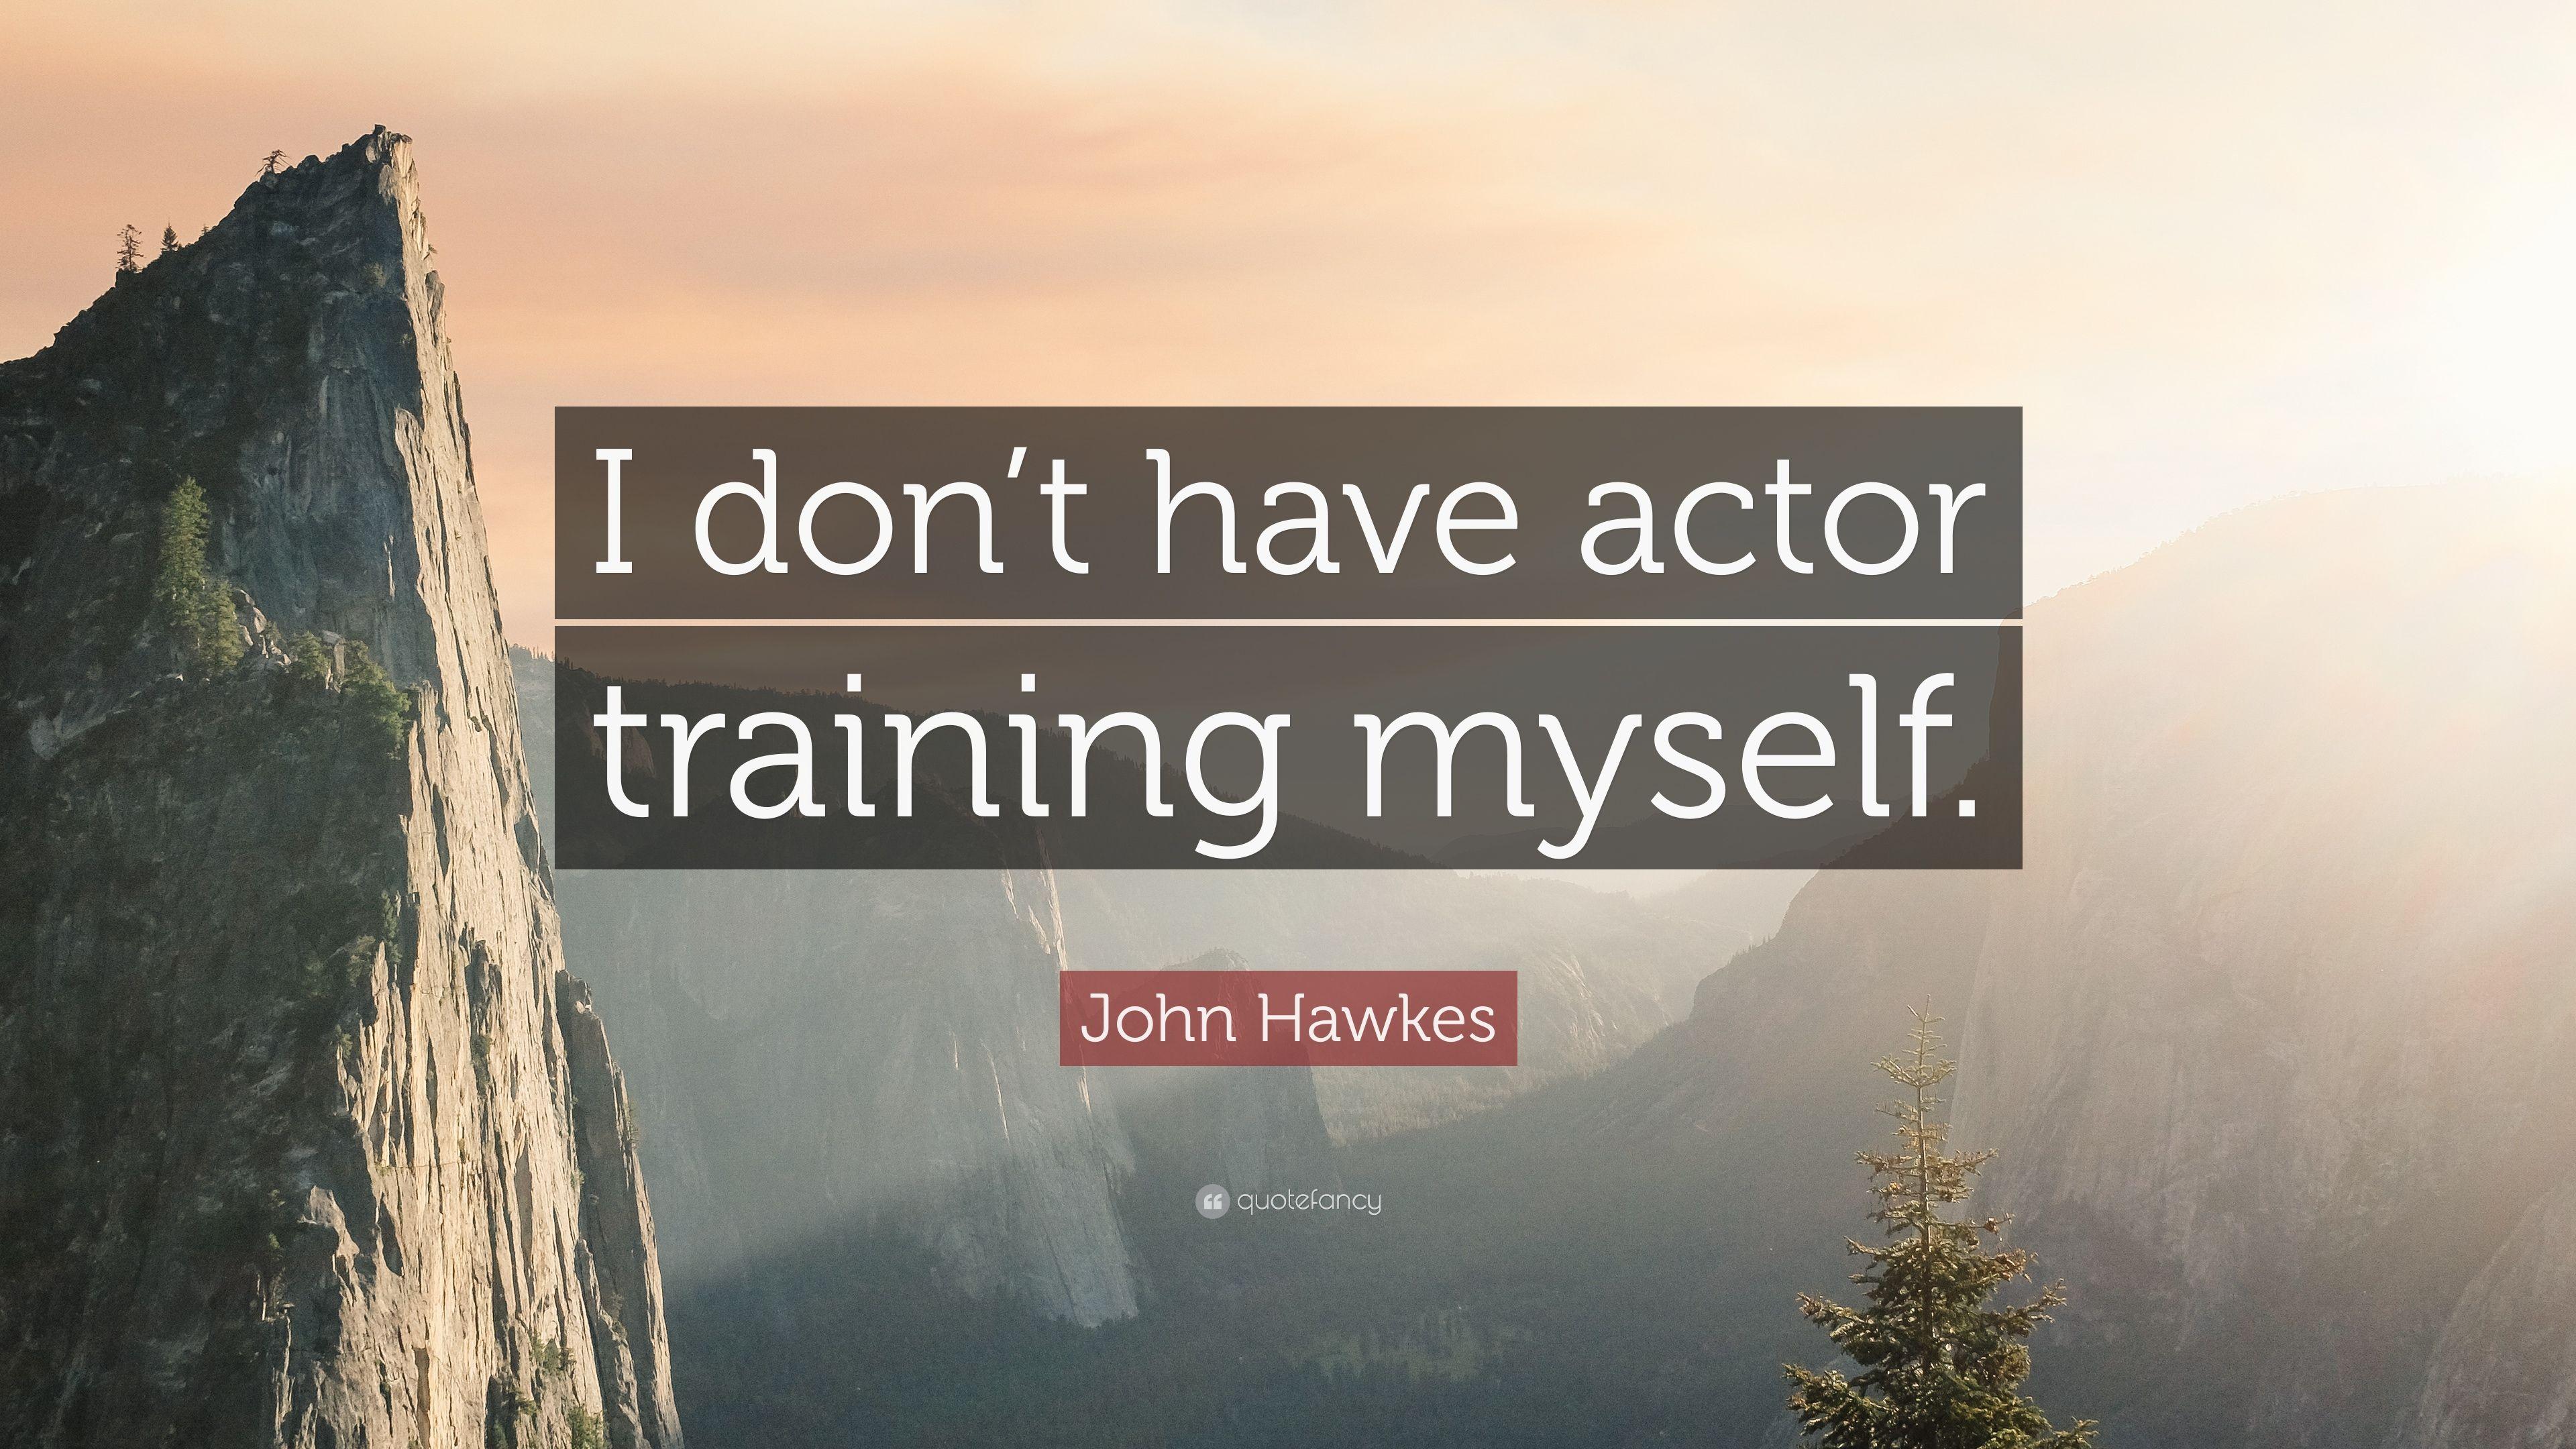 John Hawkes Quote: “I don't have actor training myself.” 7